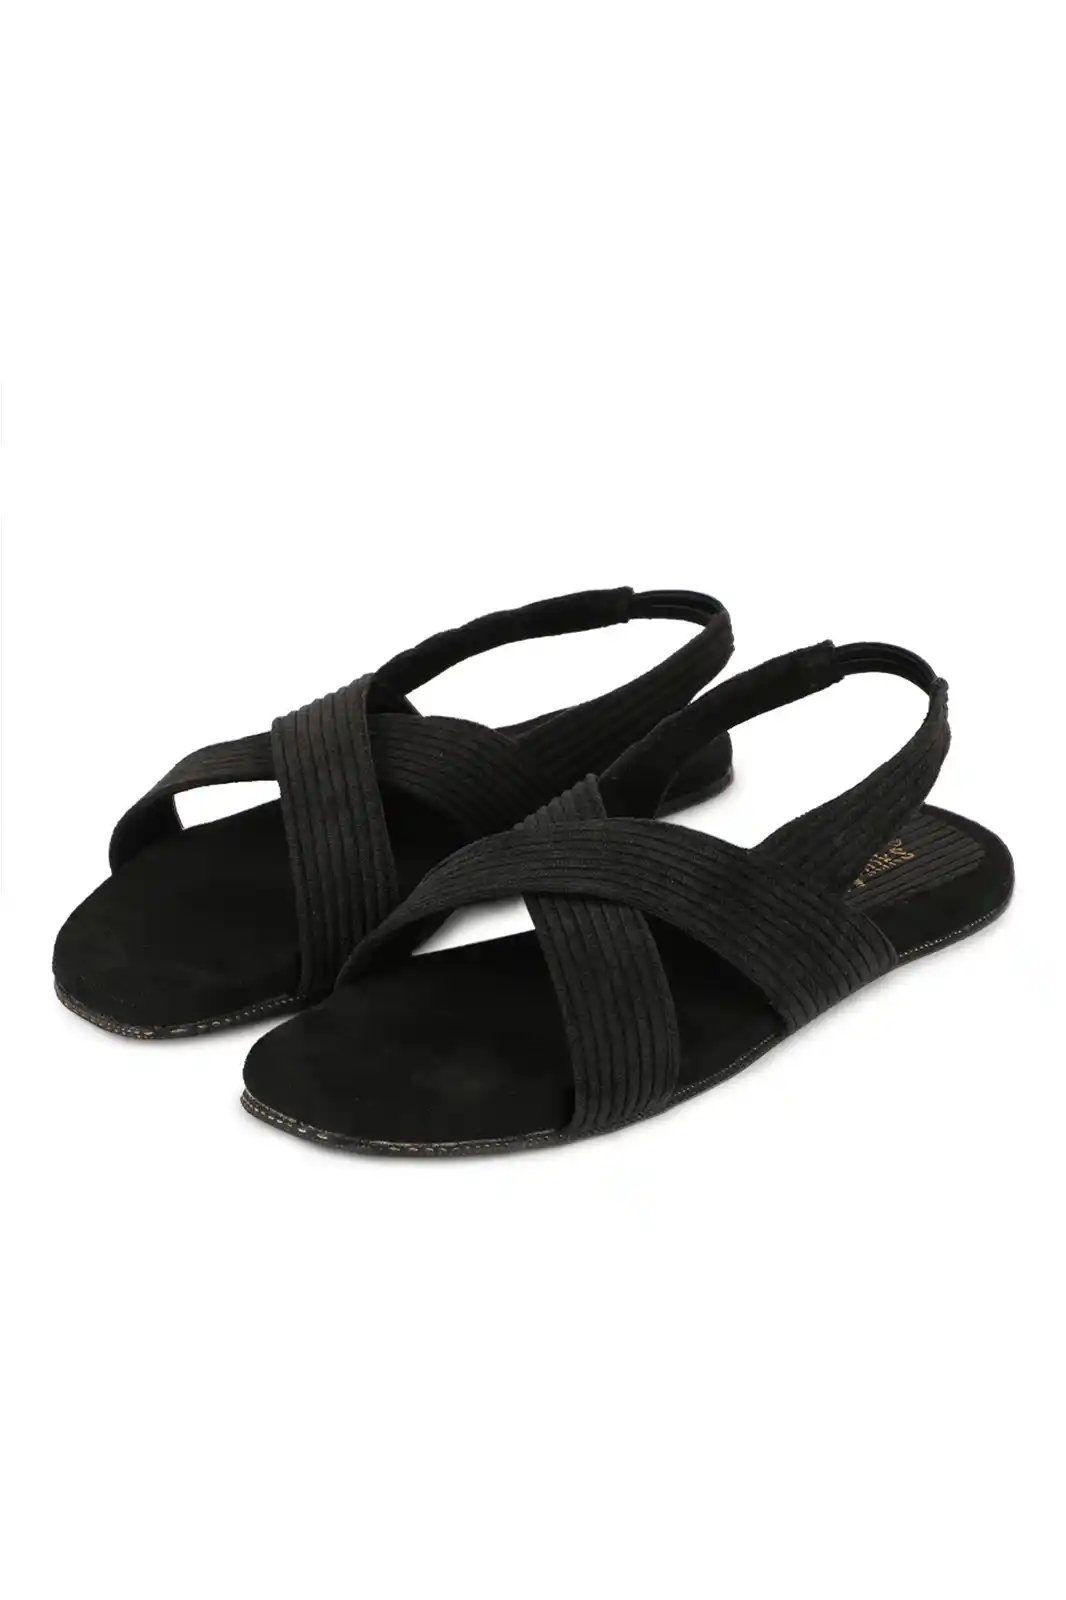 Paaduks Bero Charcoal Black Women Sandals, womens sandals and flip flops, women sandals leather, ladies sandals leather, two strap sandals, flip flops and slippers, women's sandals with soft soles, women's sandals brown leather, women's high top leather shoes, flip flop sandals near me, womens flats, women's flats, womens flats sandals, women flats shoes, womens flats comfortable, womens flats brown, best women's flats, chappals for womens flat, women's jutti flats, womens flats dress shoes, women's flats with laces, women's flats brands, womens paaduks, womens footwear, womens sandals, women's shoes, women's sandals, women's formal shoes, womens sandals heels, women's heel sandals, women's shoe brands, womens sandals crocs, women's shoes online, women's footwear flats, organic footwear, vegan footwear india, without heel sandals, vegan shoes in india, vegan shoes india, best brand for women's sandals in india, ladies sandals without heel